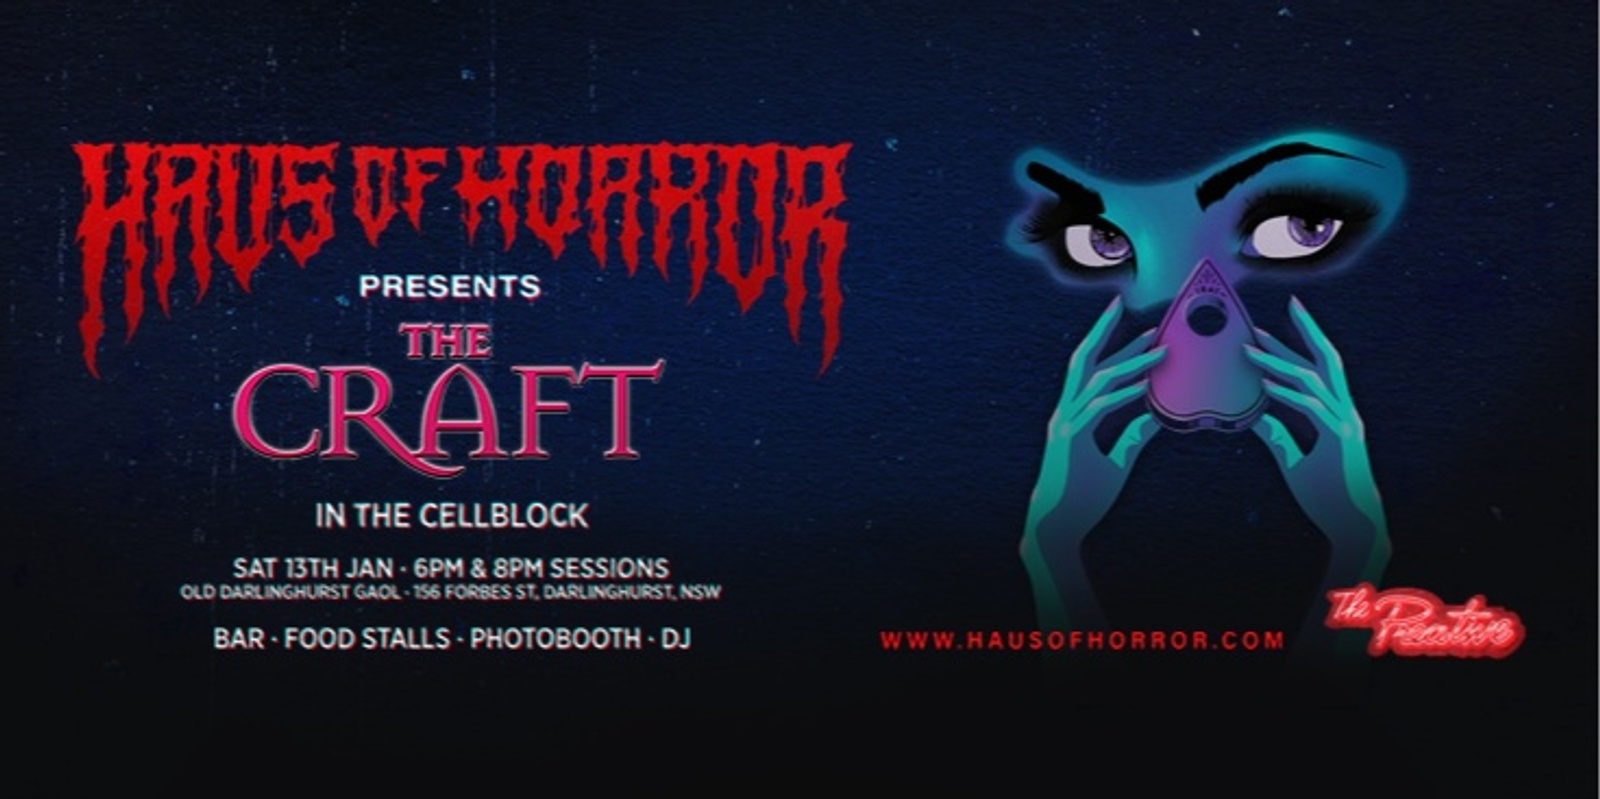 Banner image for The Craft presented by Haus of Horror